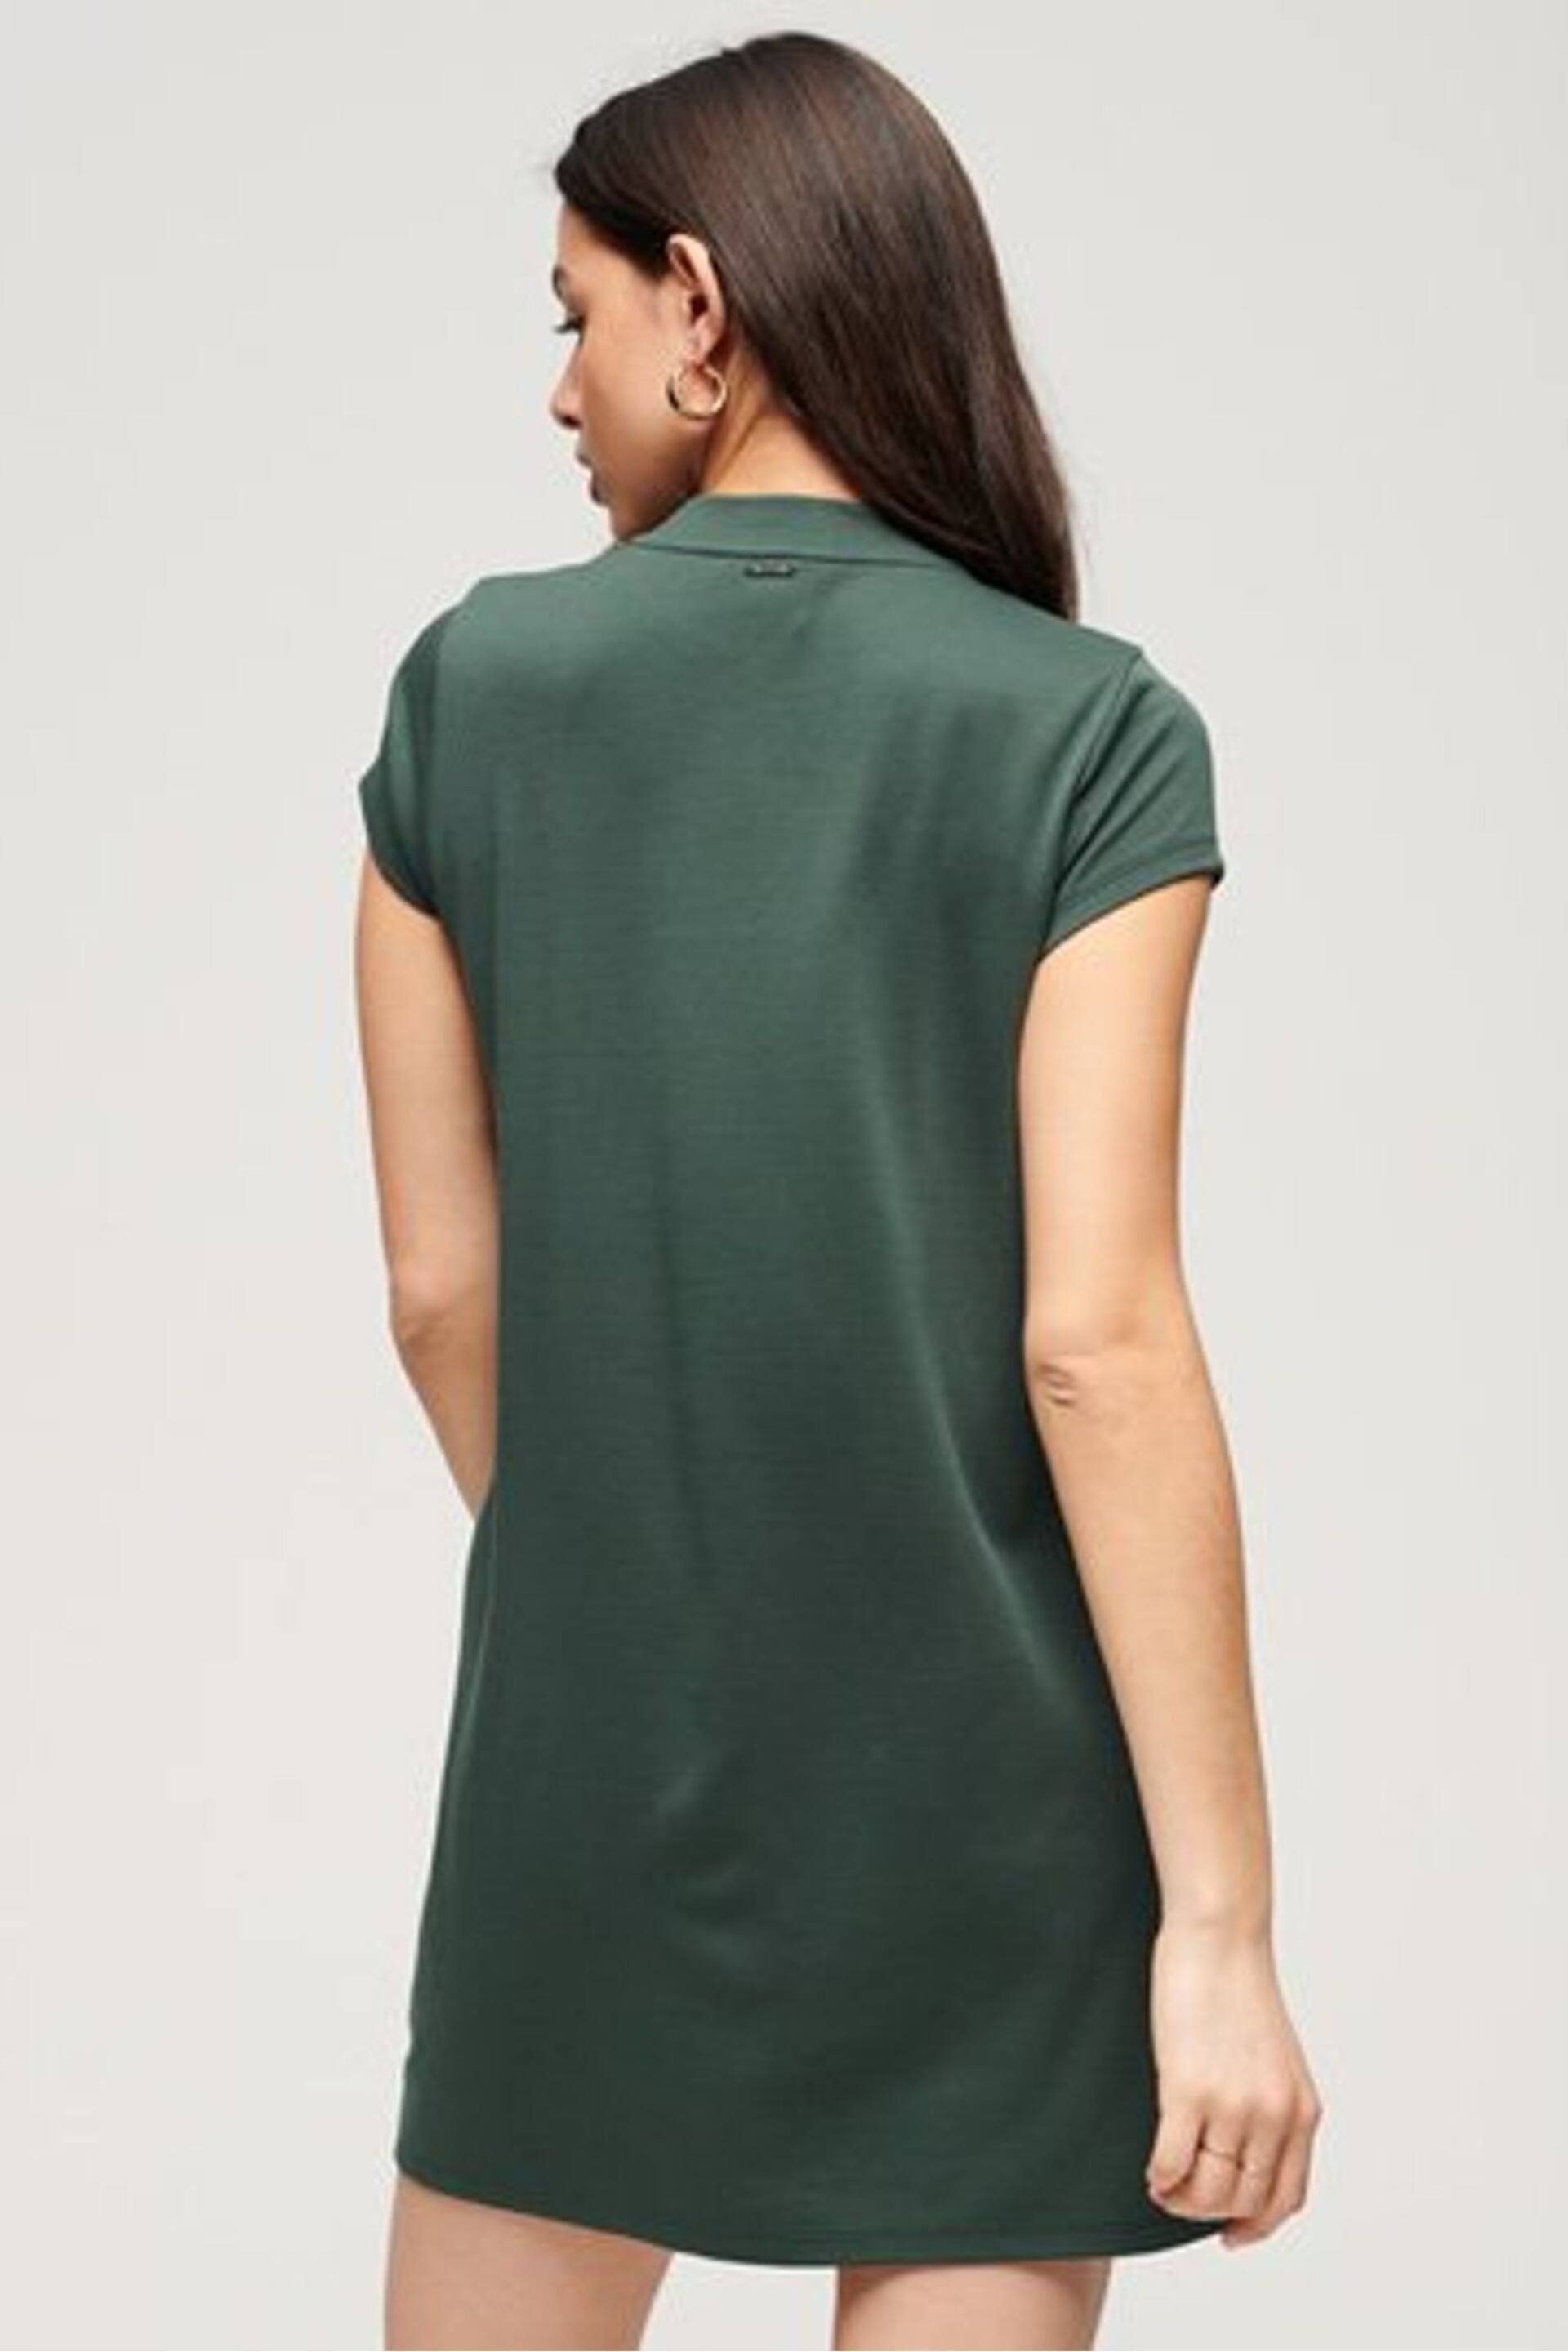 Superdry Green Short Sleeve A-line Mini Dress - Image 2 of 5